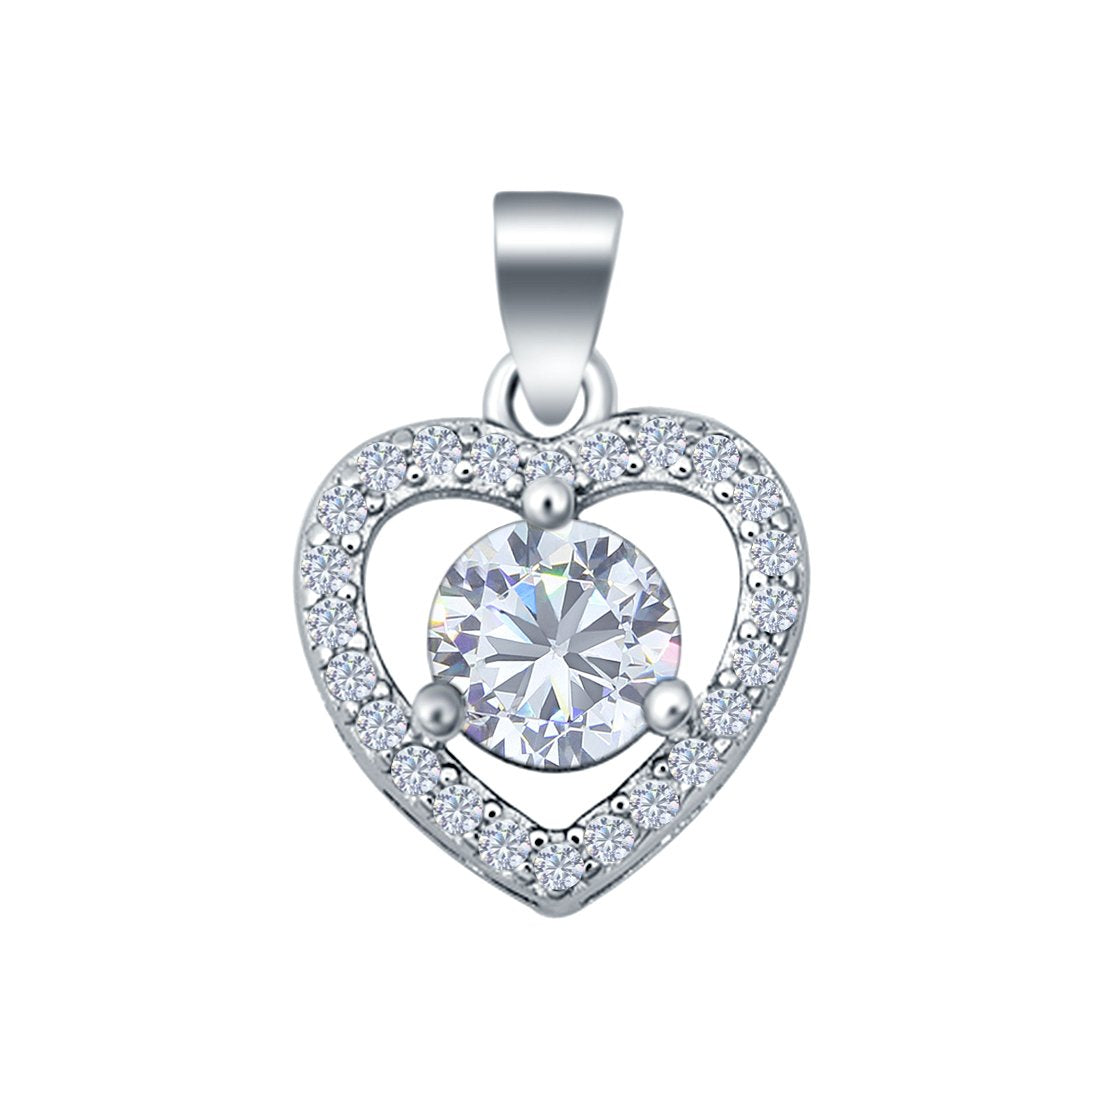 Heart Charm Pendant Round Simulated Cubic Zirconia 925 Sterling Silver (10mm)